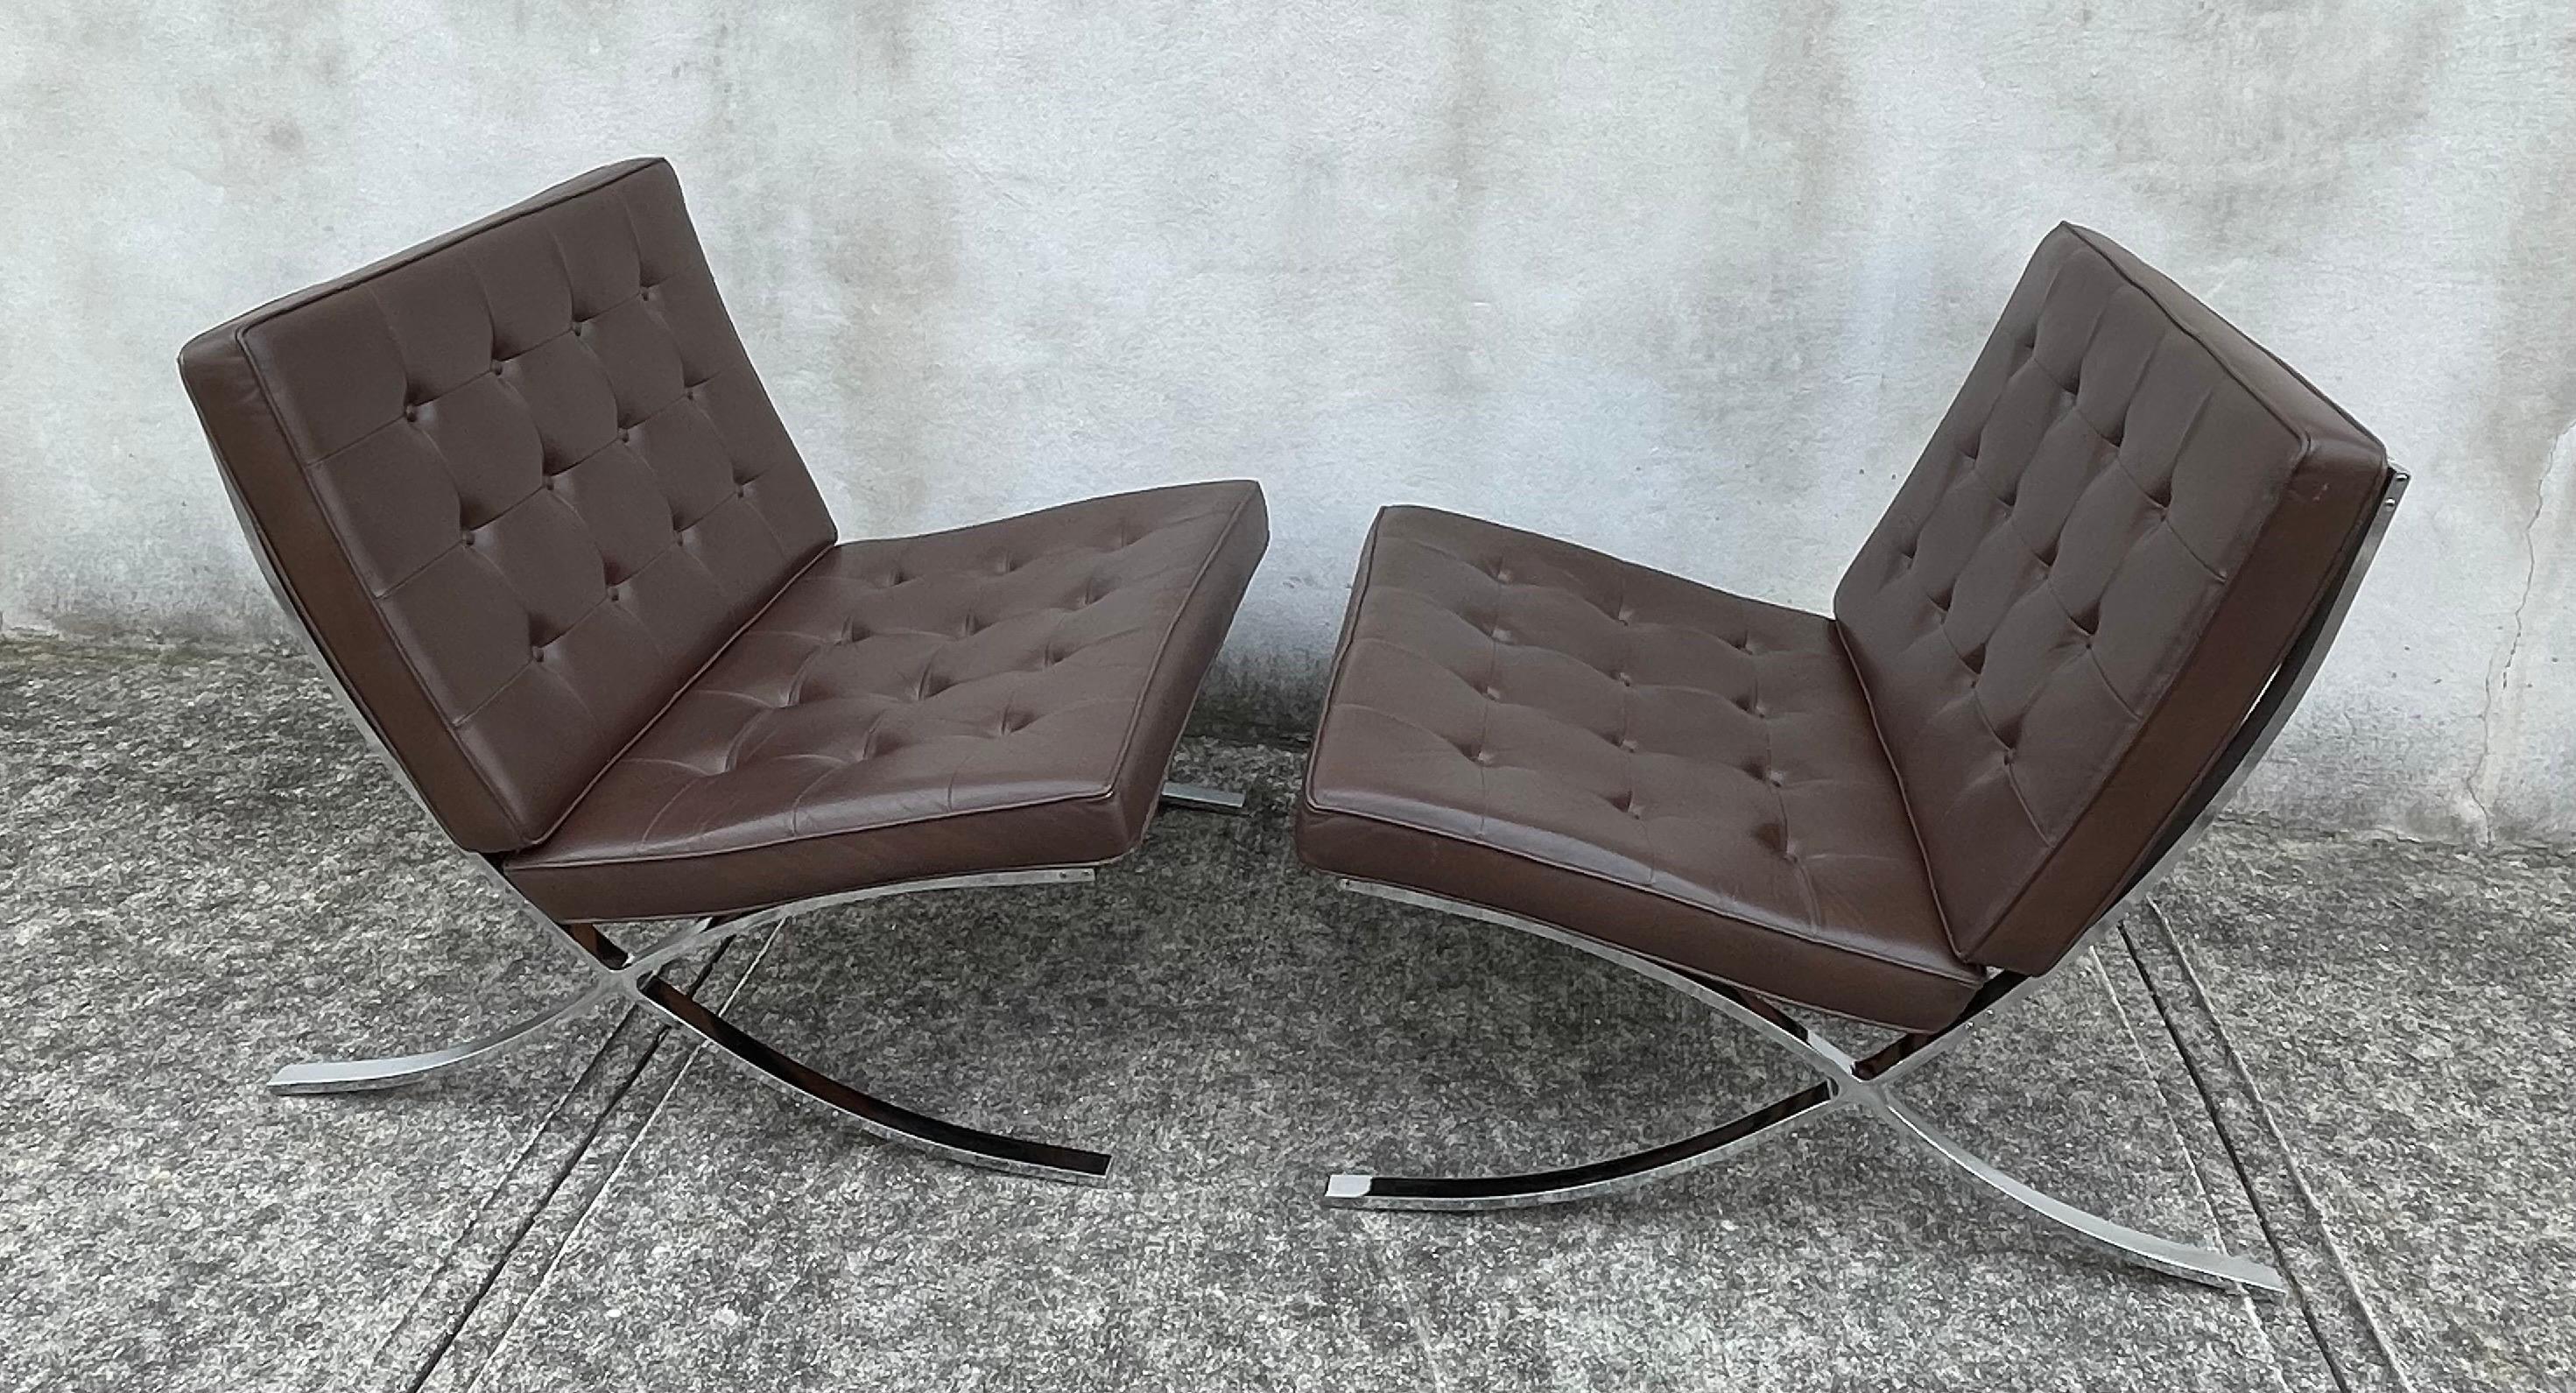 Pair of Mid-Century Modern Barcelona Chairs in Brown Leather, 1970's Generation For Sale 10